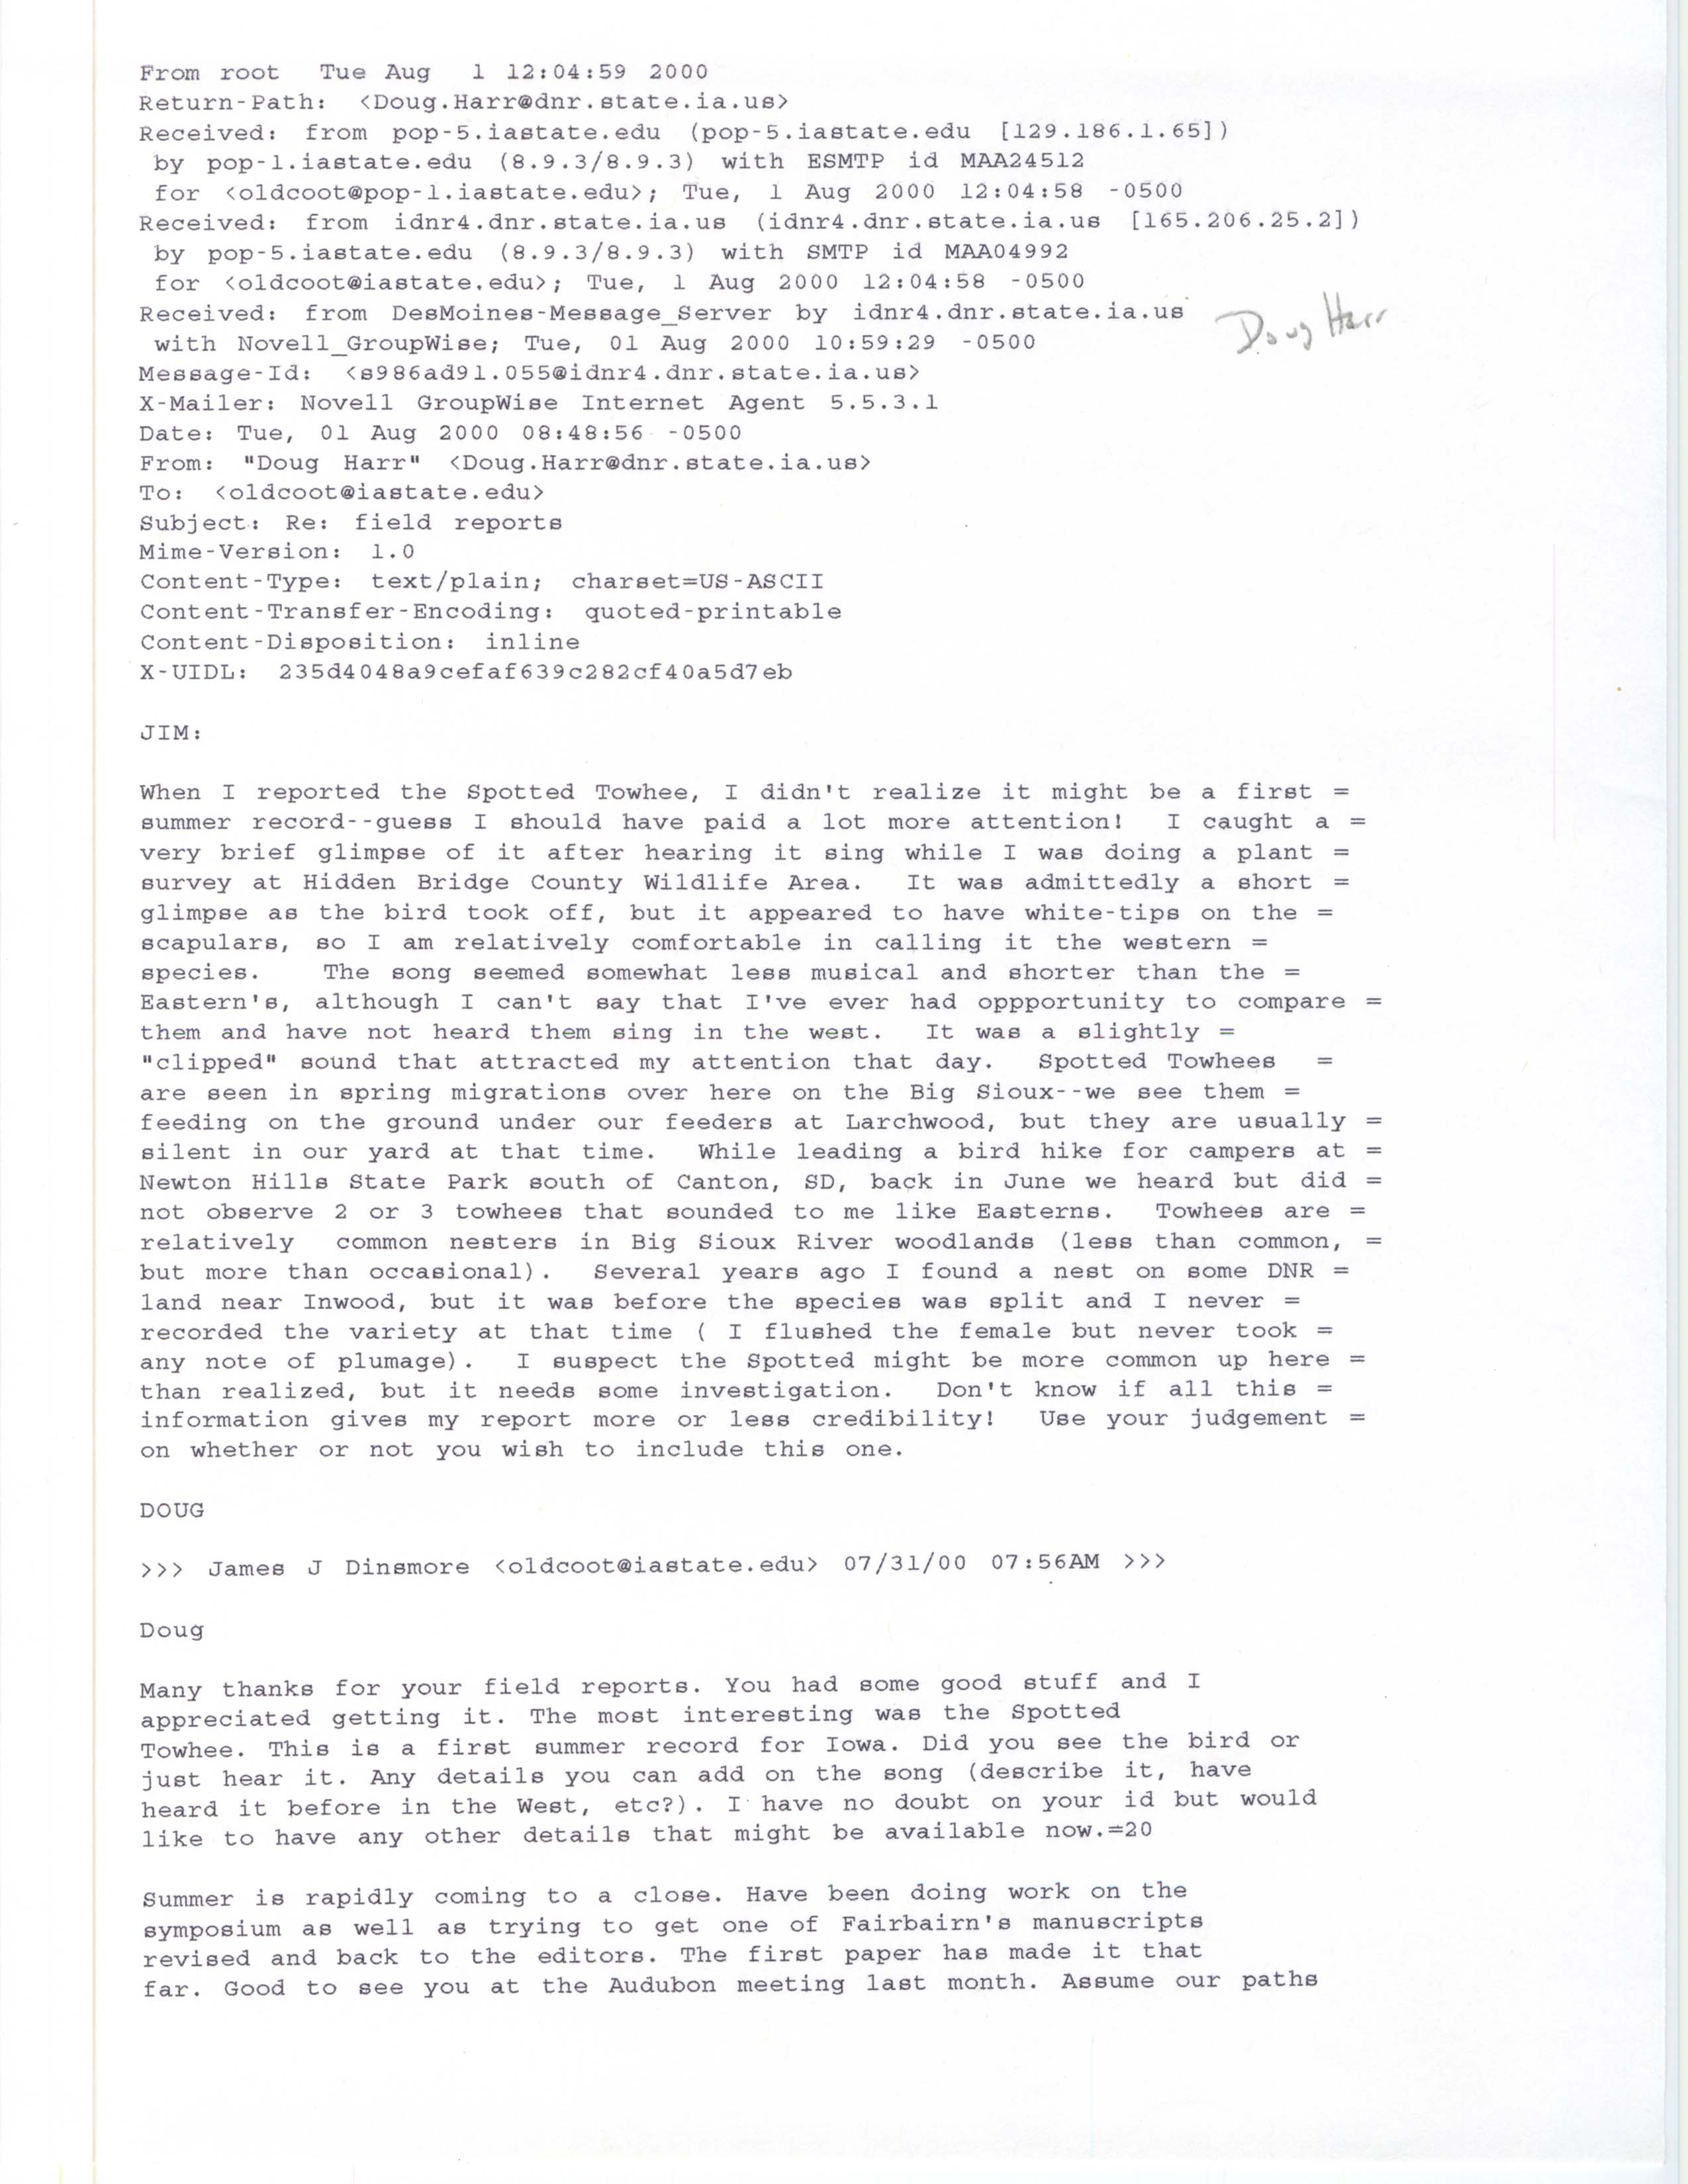 Douglas C. Harr emails to James J. Dinsmore and the IA-BIRD mailing list regarding summer bird sightings, August 1 and August 8, 2000